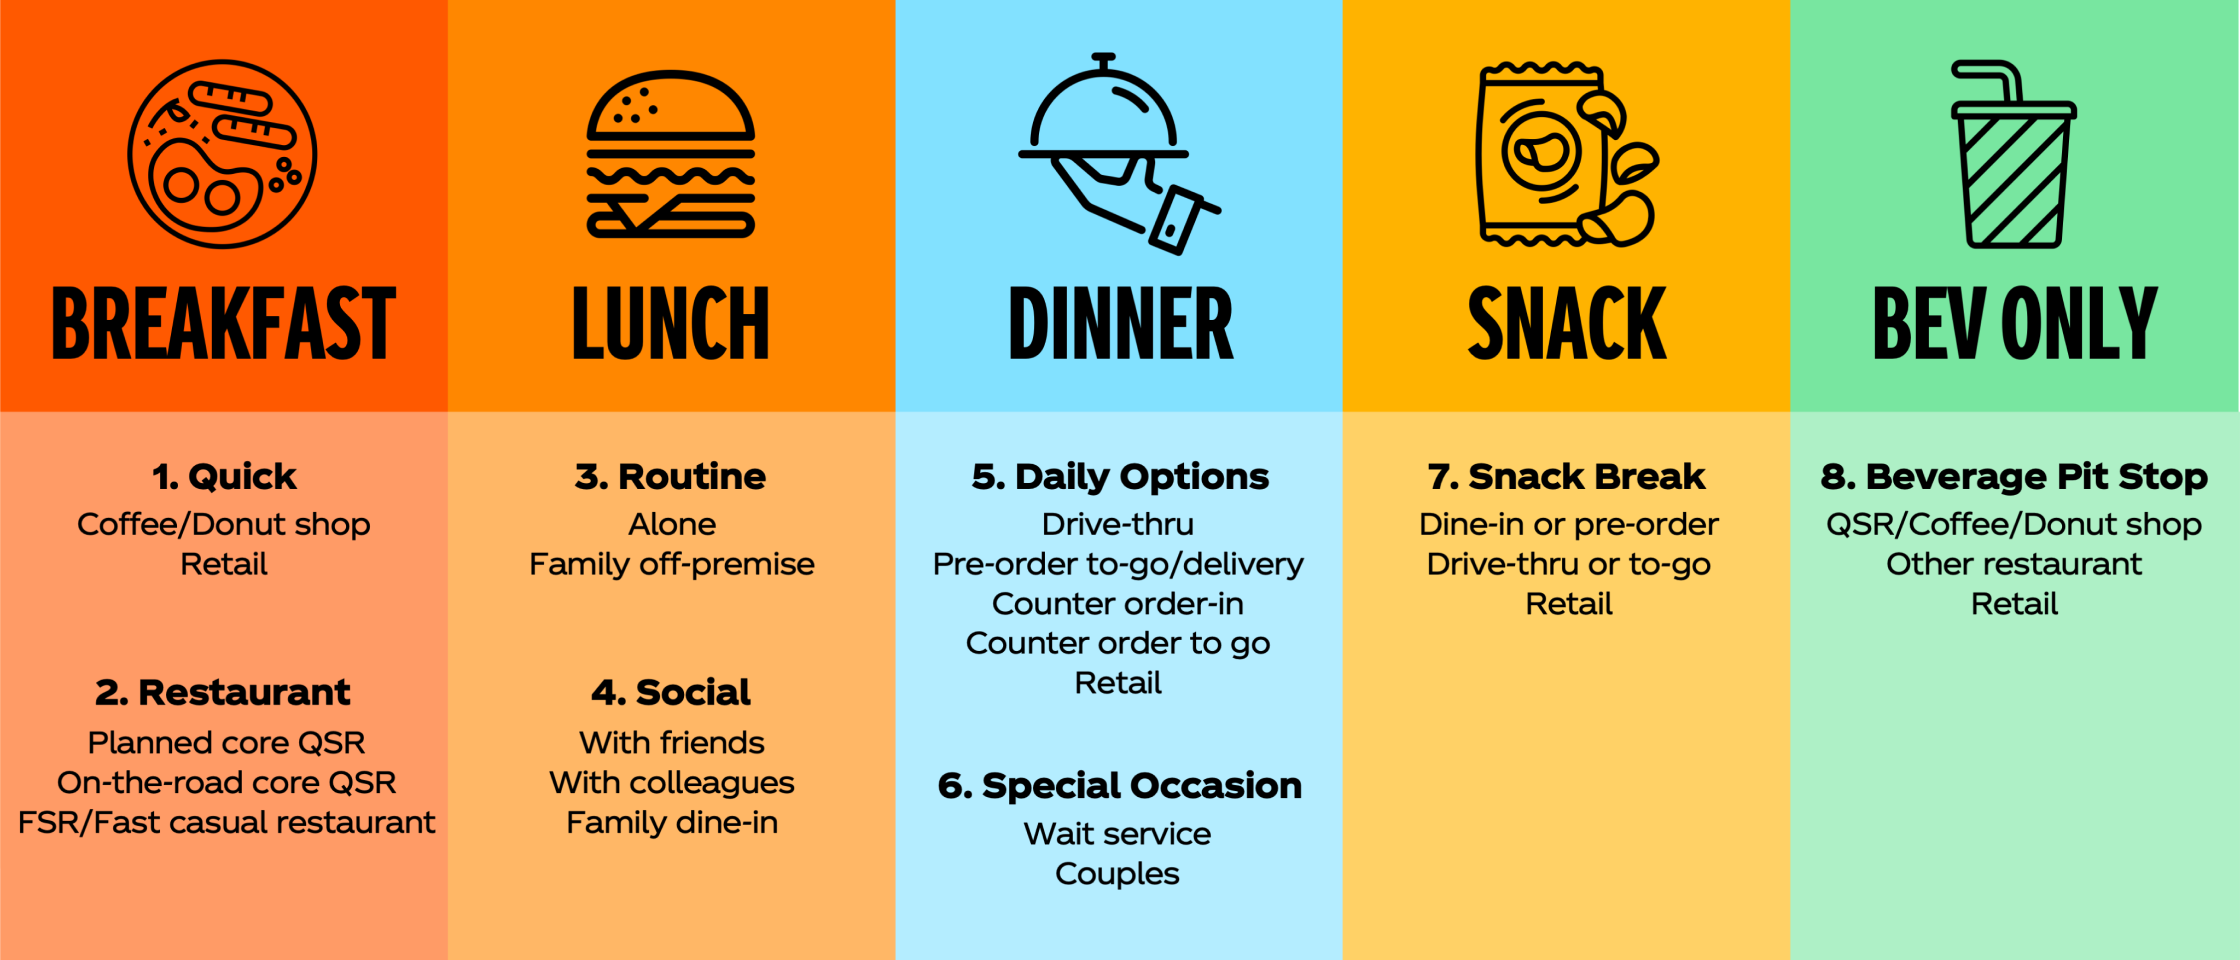 Infographic showing the segment breakdown mentioned in the paragraph above it, as follows: Breakfast (sub segments: Quick and Restaurant), Lunch (sub segments: Routine and Social), Dinner (sub segments: Daily Options and Special Occasion), Snack (sub segment: Snack Break), and Bev Only (sub segment: Beverage Pit Stop)